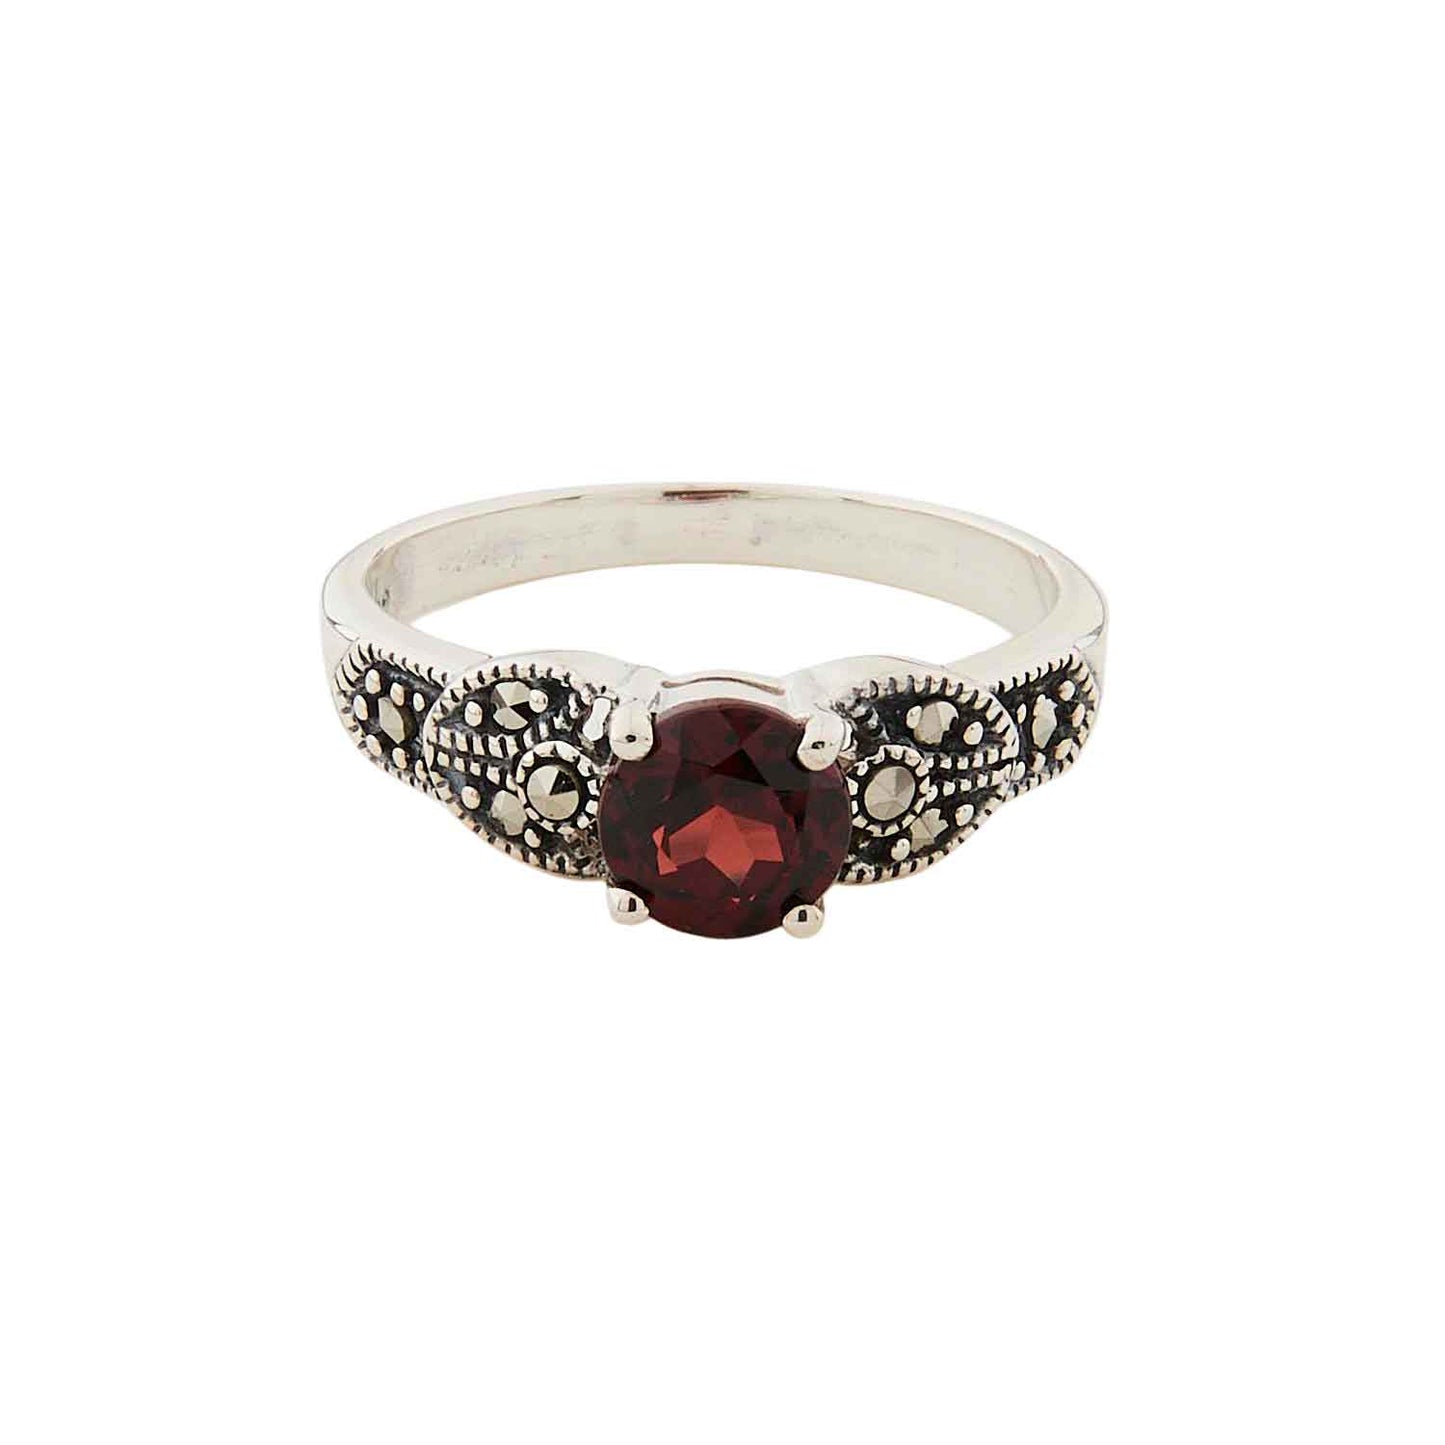 Art Deco Style Ring: Sterling Silver, Marcasite, Red Garnet